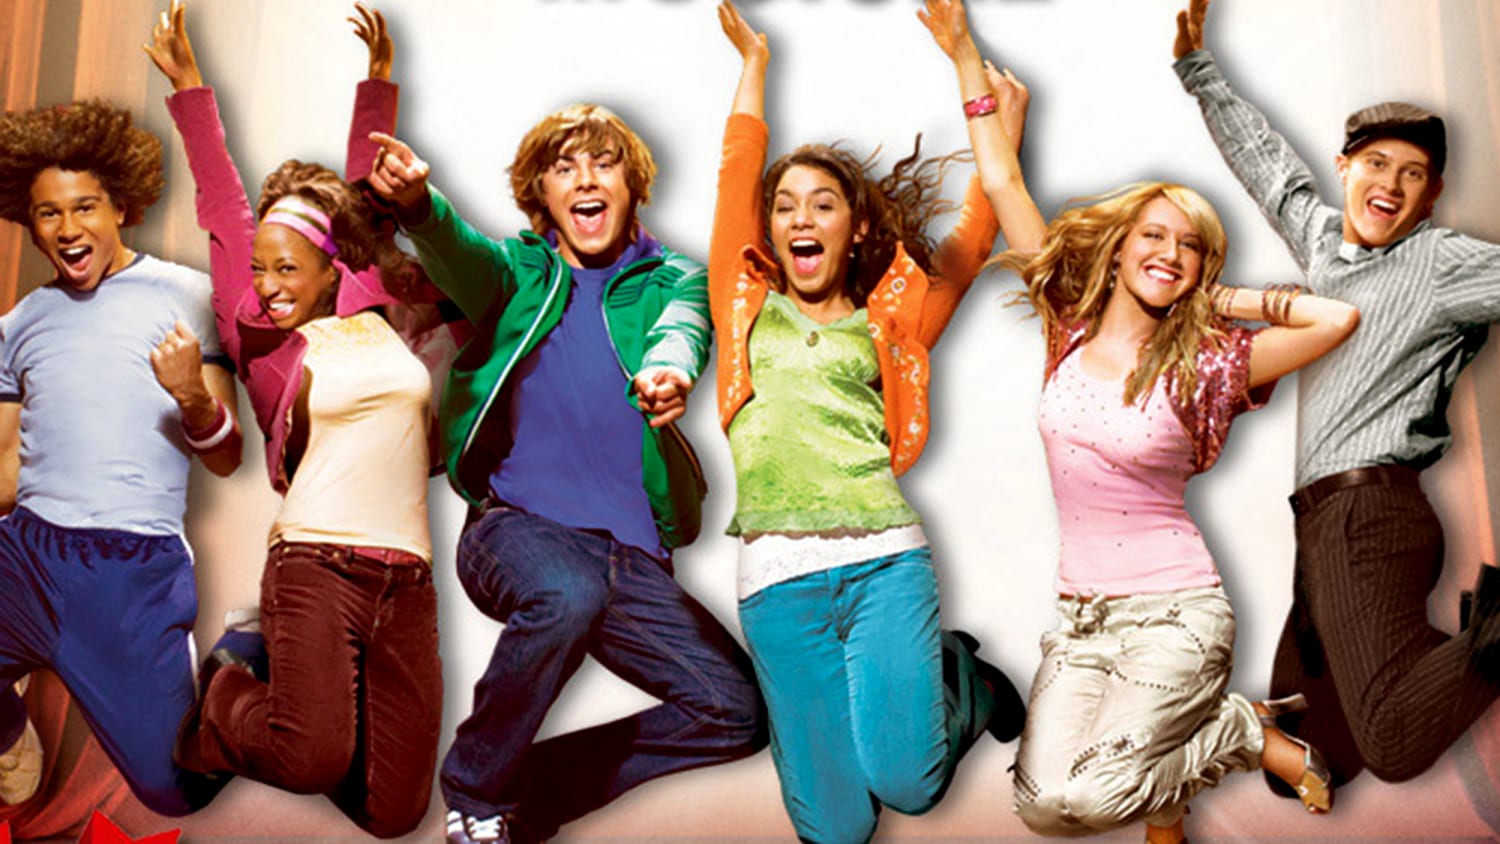 Vanessa Hudgens Ashley Tisdale Dance To High School Musical Song